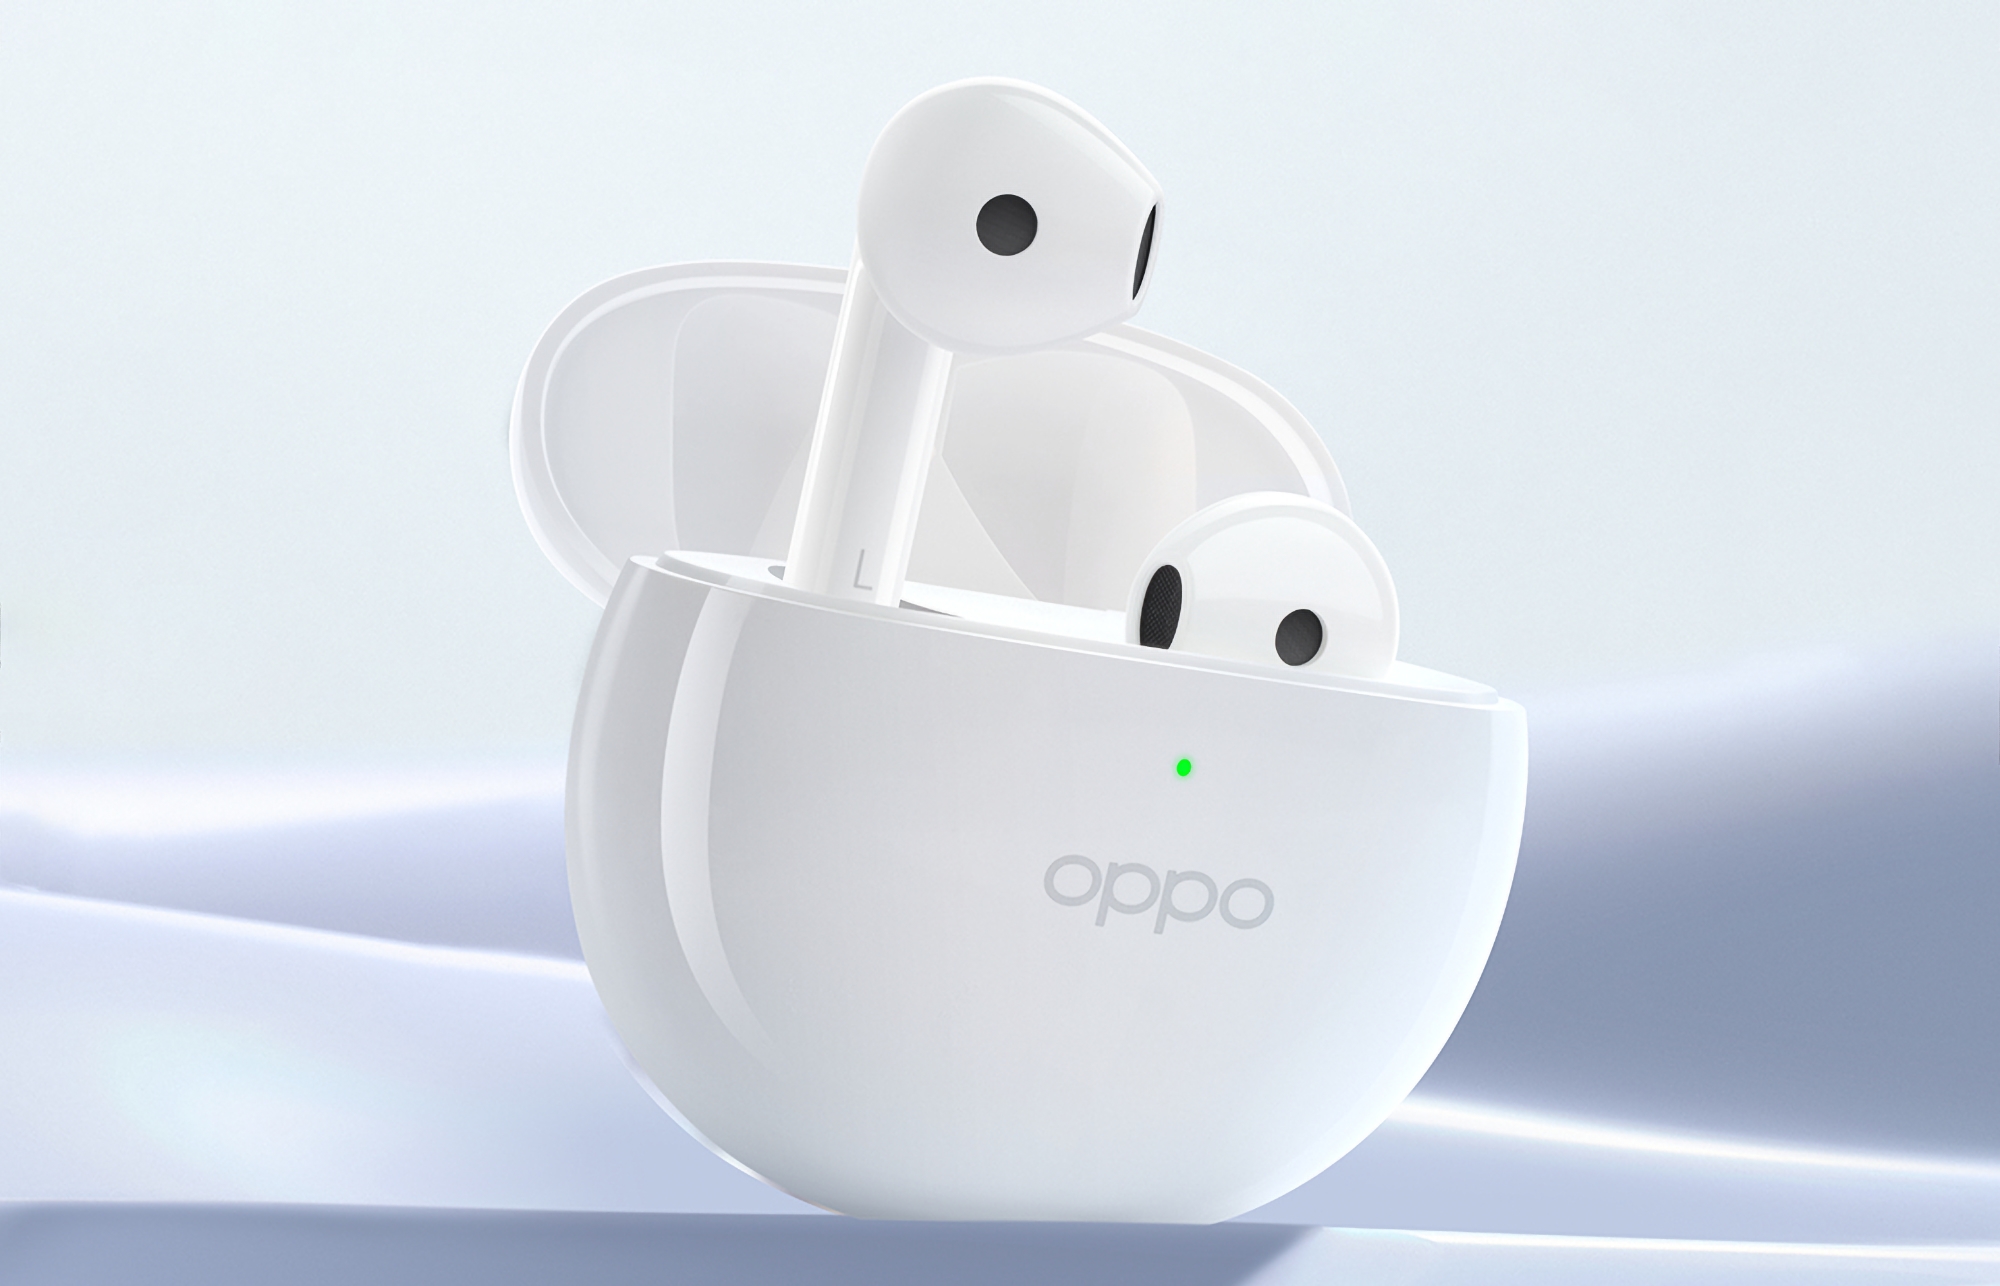 OPPO Enco R3: TWS headphones with AirPods-like design, Spatial Sound and up to 35 hours of battery life for $42